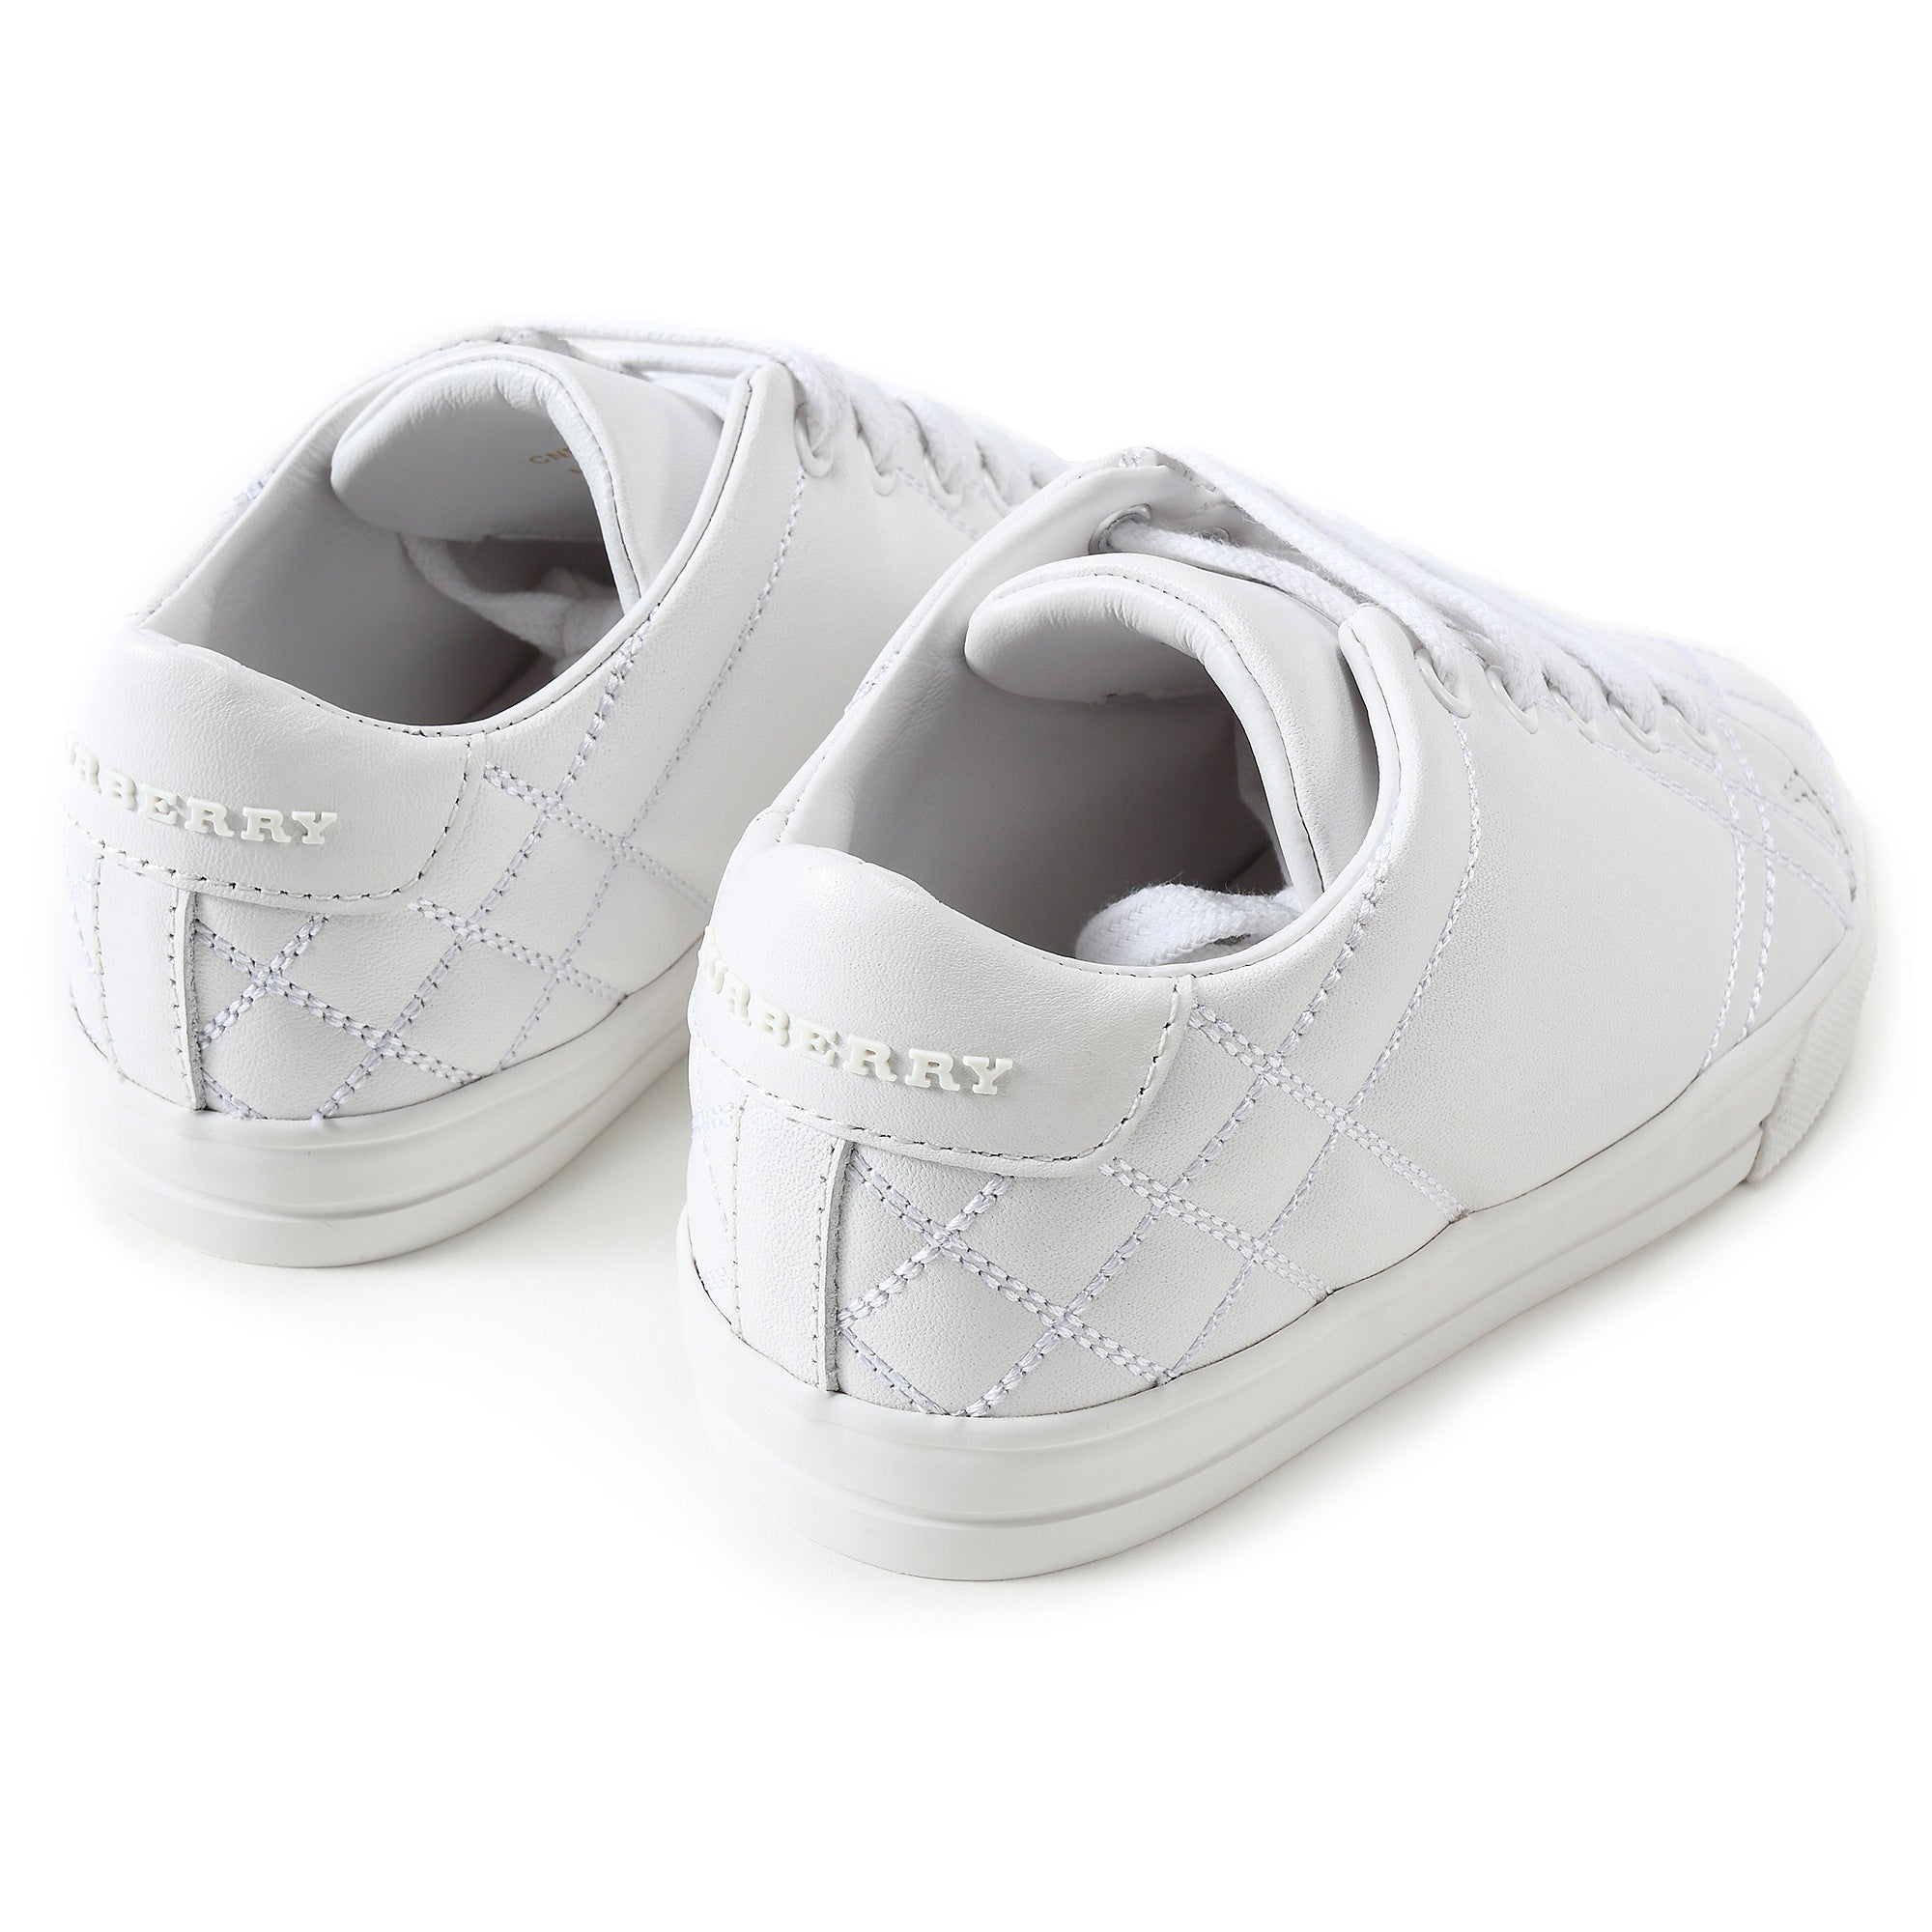 Baby Optic White Calf Grain Leather Trainers